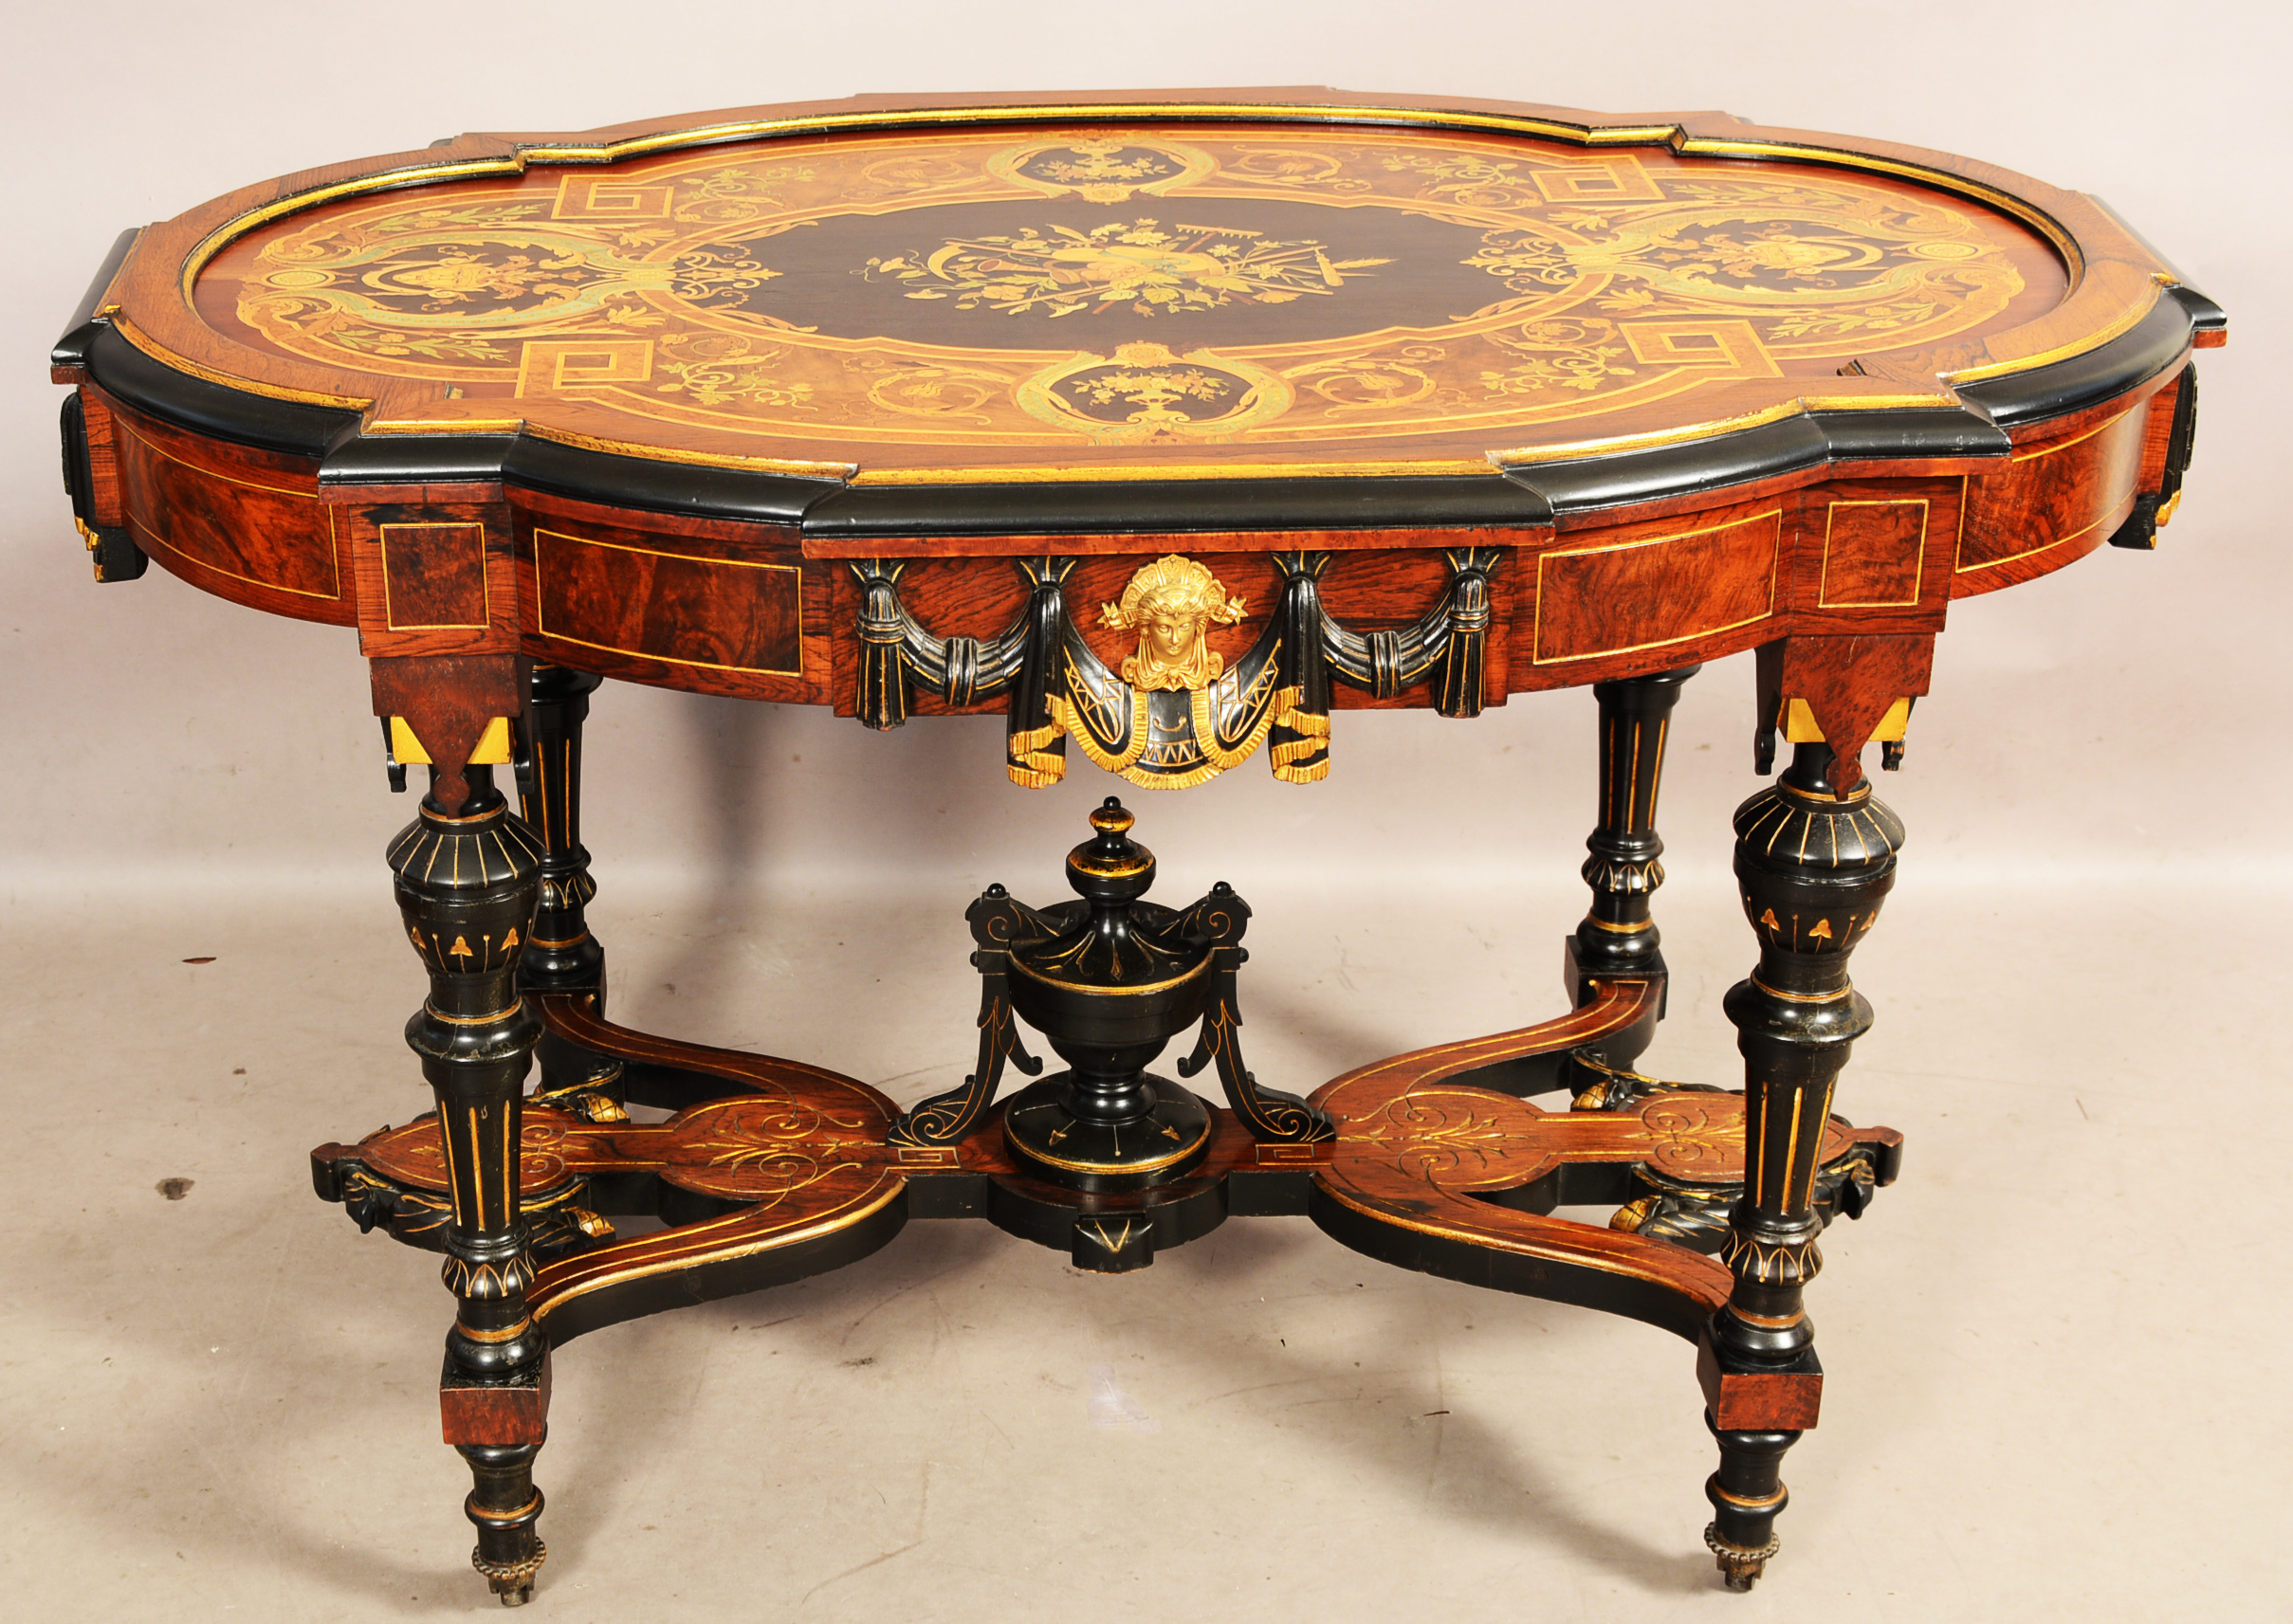 American Renaissance Victorian rosewood marquetry inlaid parlor table with bronze mounts, turned legs, carved stretcher and finials. Attributed to Herter Bros., New York, 31in high x 32in wide x 47 long. Estimate: $4,000-$7,000. Bruhns Auction Gallery image